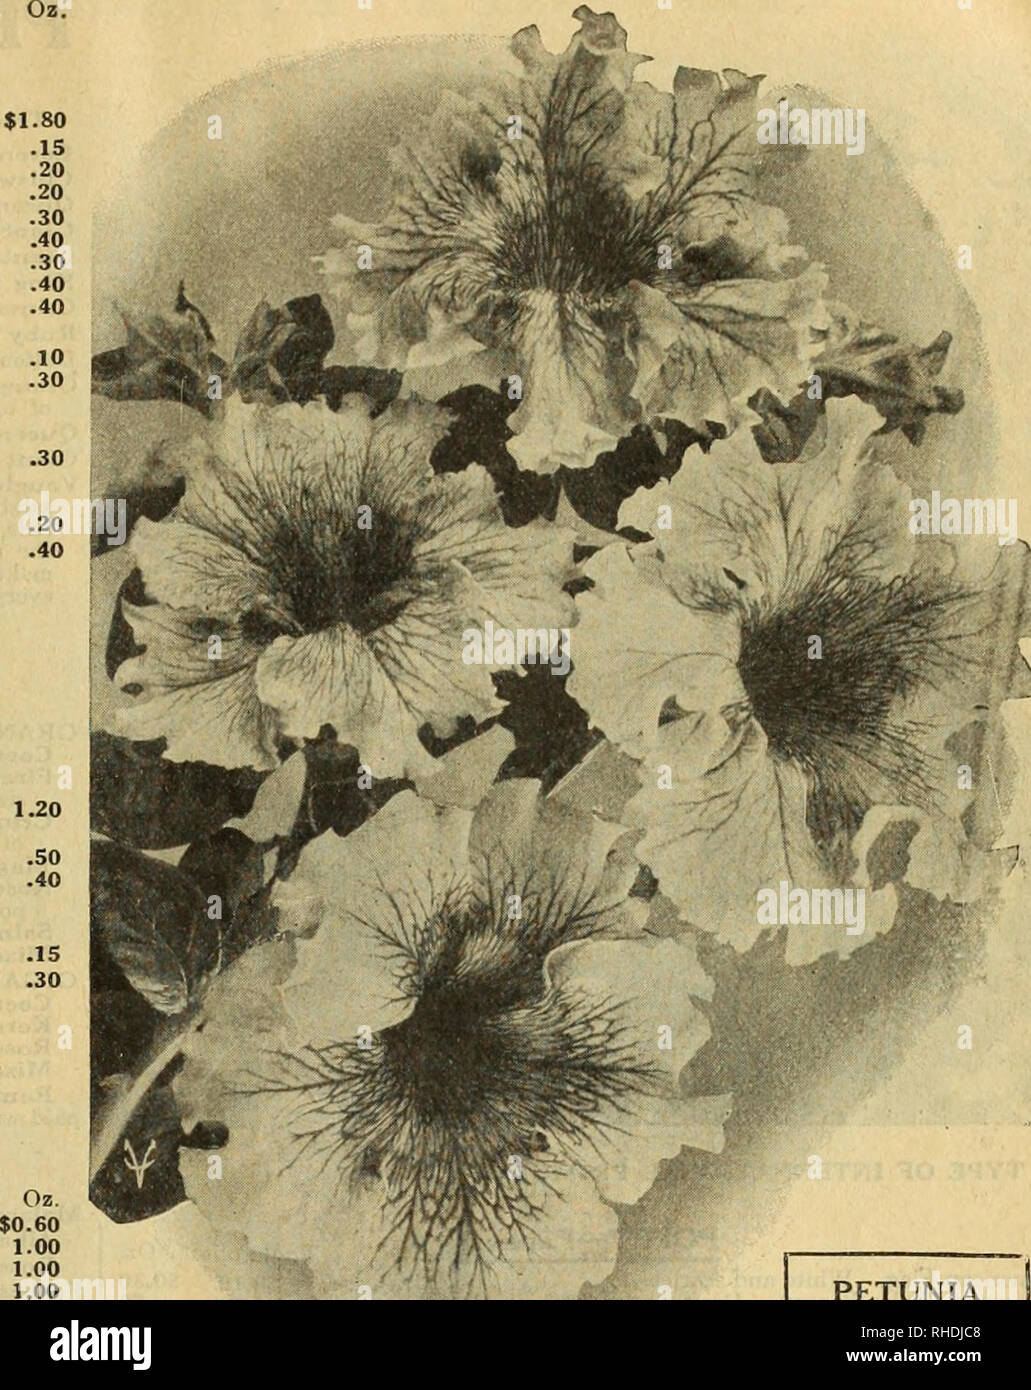 . Book for florists. Flowers Seeds Catalogs; Bulbs (Plants) Seedlings Catalogs; Vegetables Seeds Catalogs; Seeds Catalogs; Horticulture Equipment and supplies Catalogs. Trade pkt Nemesia. Grand Comp. Triumph $0.35 Blue Gem 25 Strumosa Suttoni, orange 25 Strumosa Suttoni, scarlet 25 Strumosa Suttoni, mixed 25 Nemophila (Grove Flower) mixed 05 Insignis. Blue 05 Insignis Alba 05 Nicotiana Affinis. Large, white, very fragrant 10 Affinis Hybrids 10 Sylvestris. Very beautiful, sweet, pure white 10 Sanderae 10 New Hybrids, mixed 10 Nierembergia Gracilis 20 Nigella. Mixed 05 Miss Jekyll. Blue, fine cu Stock Photo